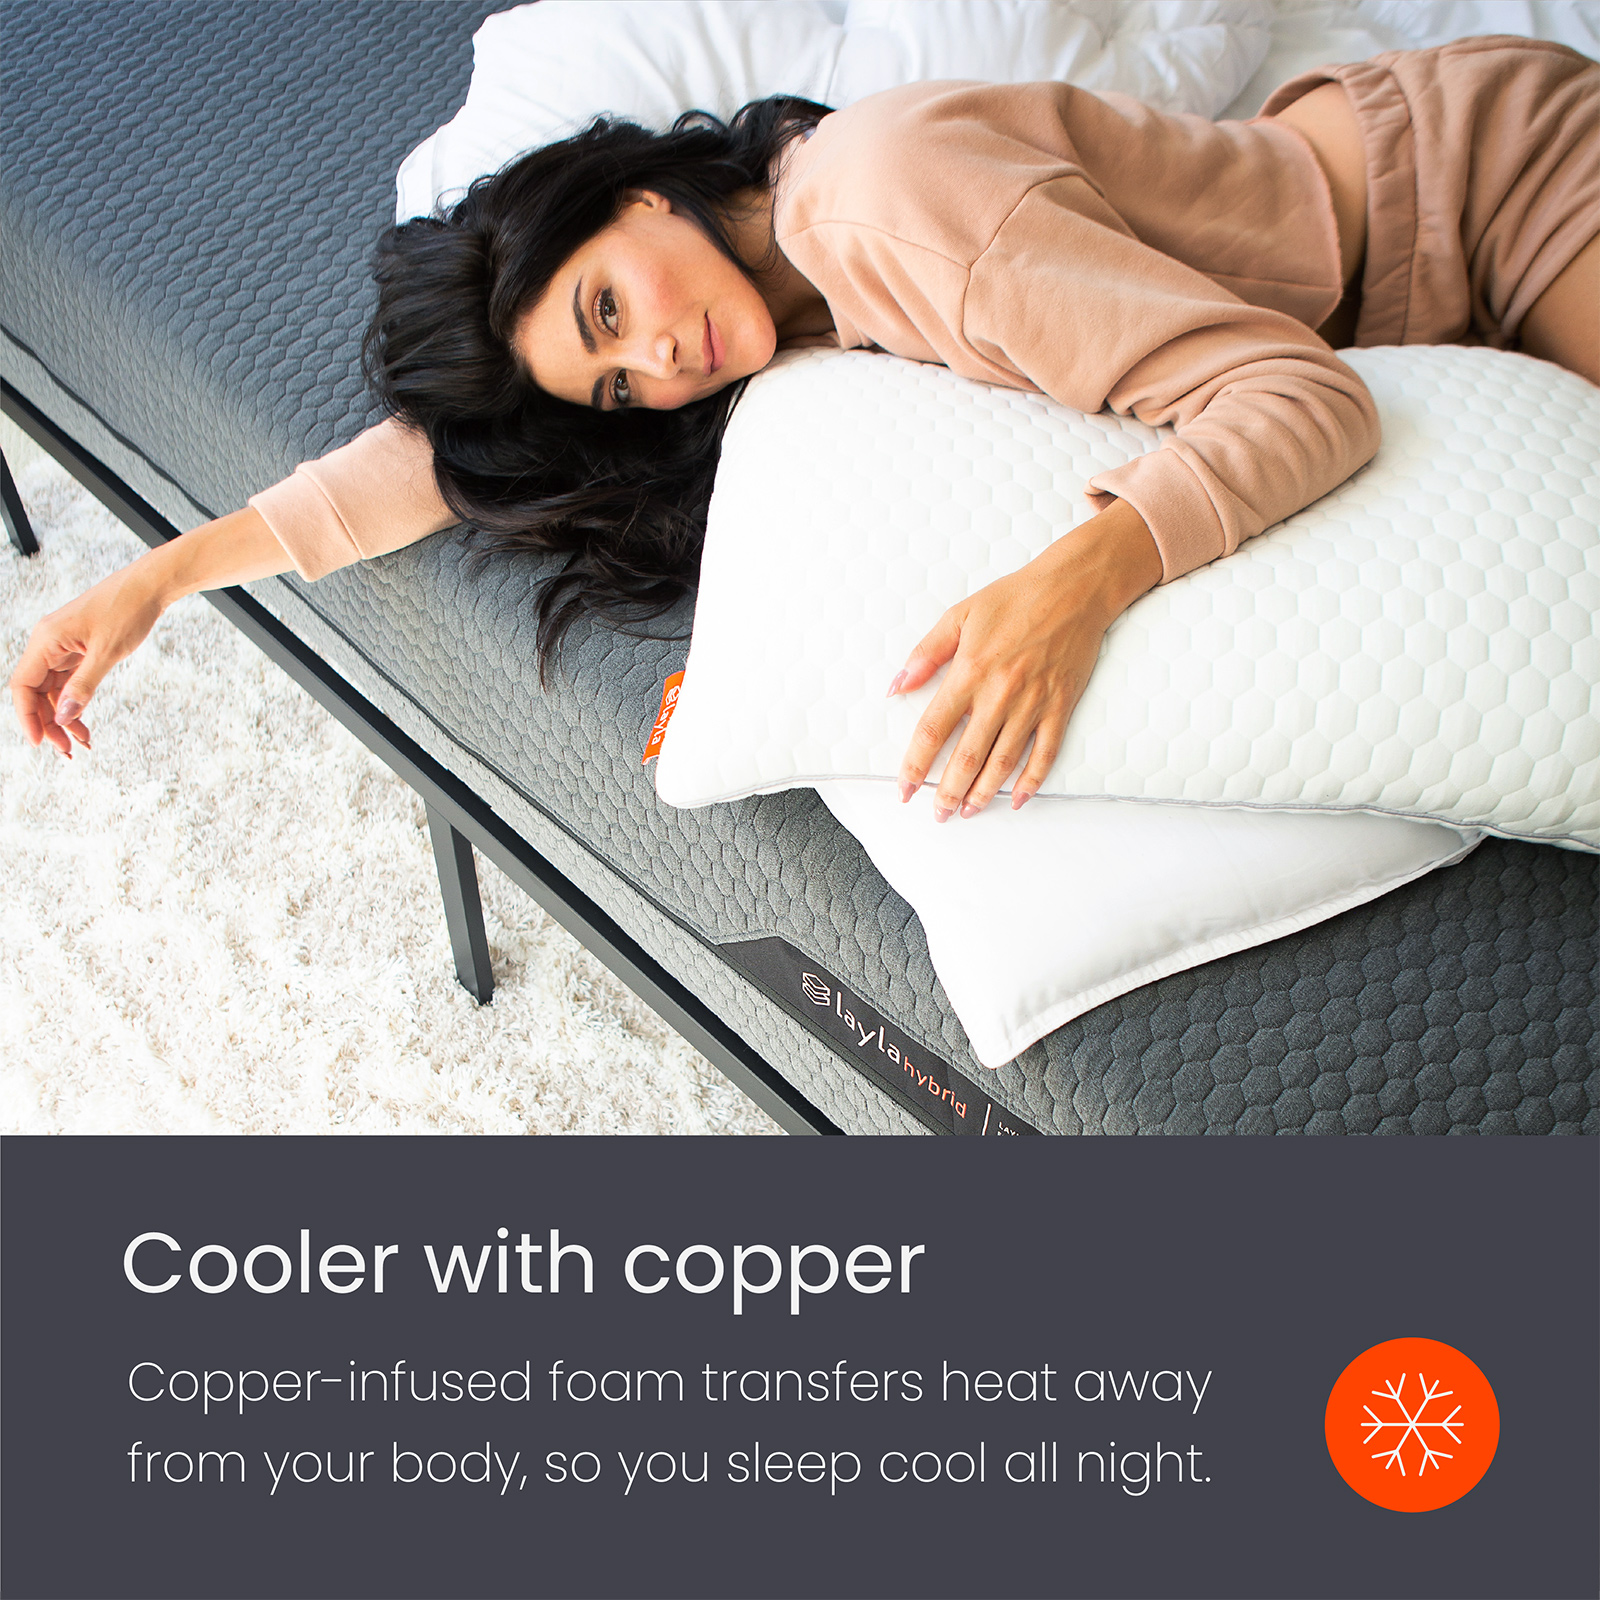 Layla Sleep Hybrid Foam Mattress | Flippable to a Soft or Firm Side (Queen) - image 4 of 7